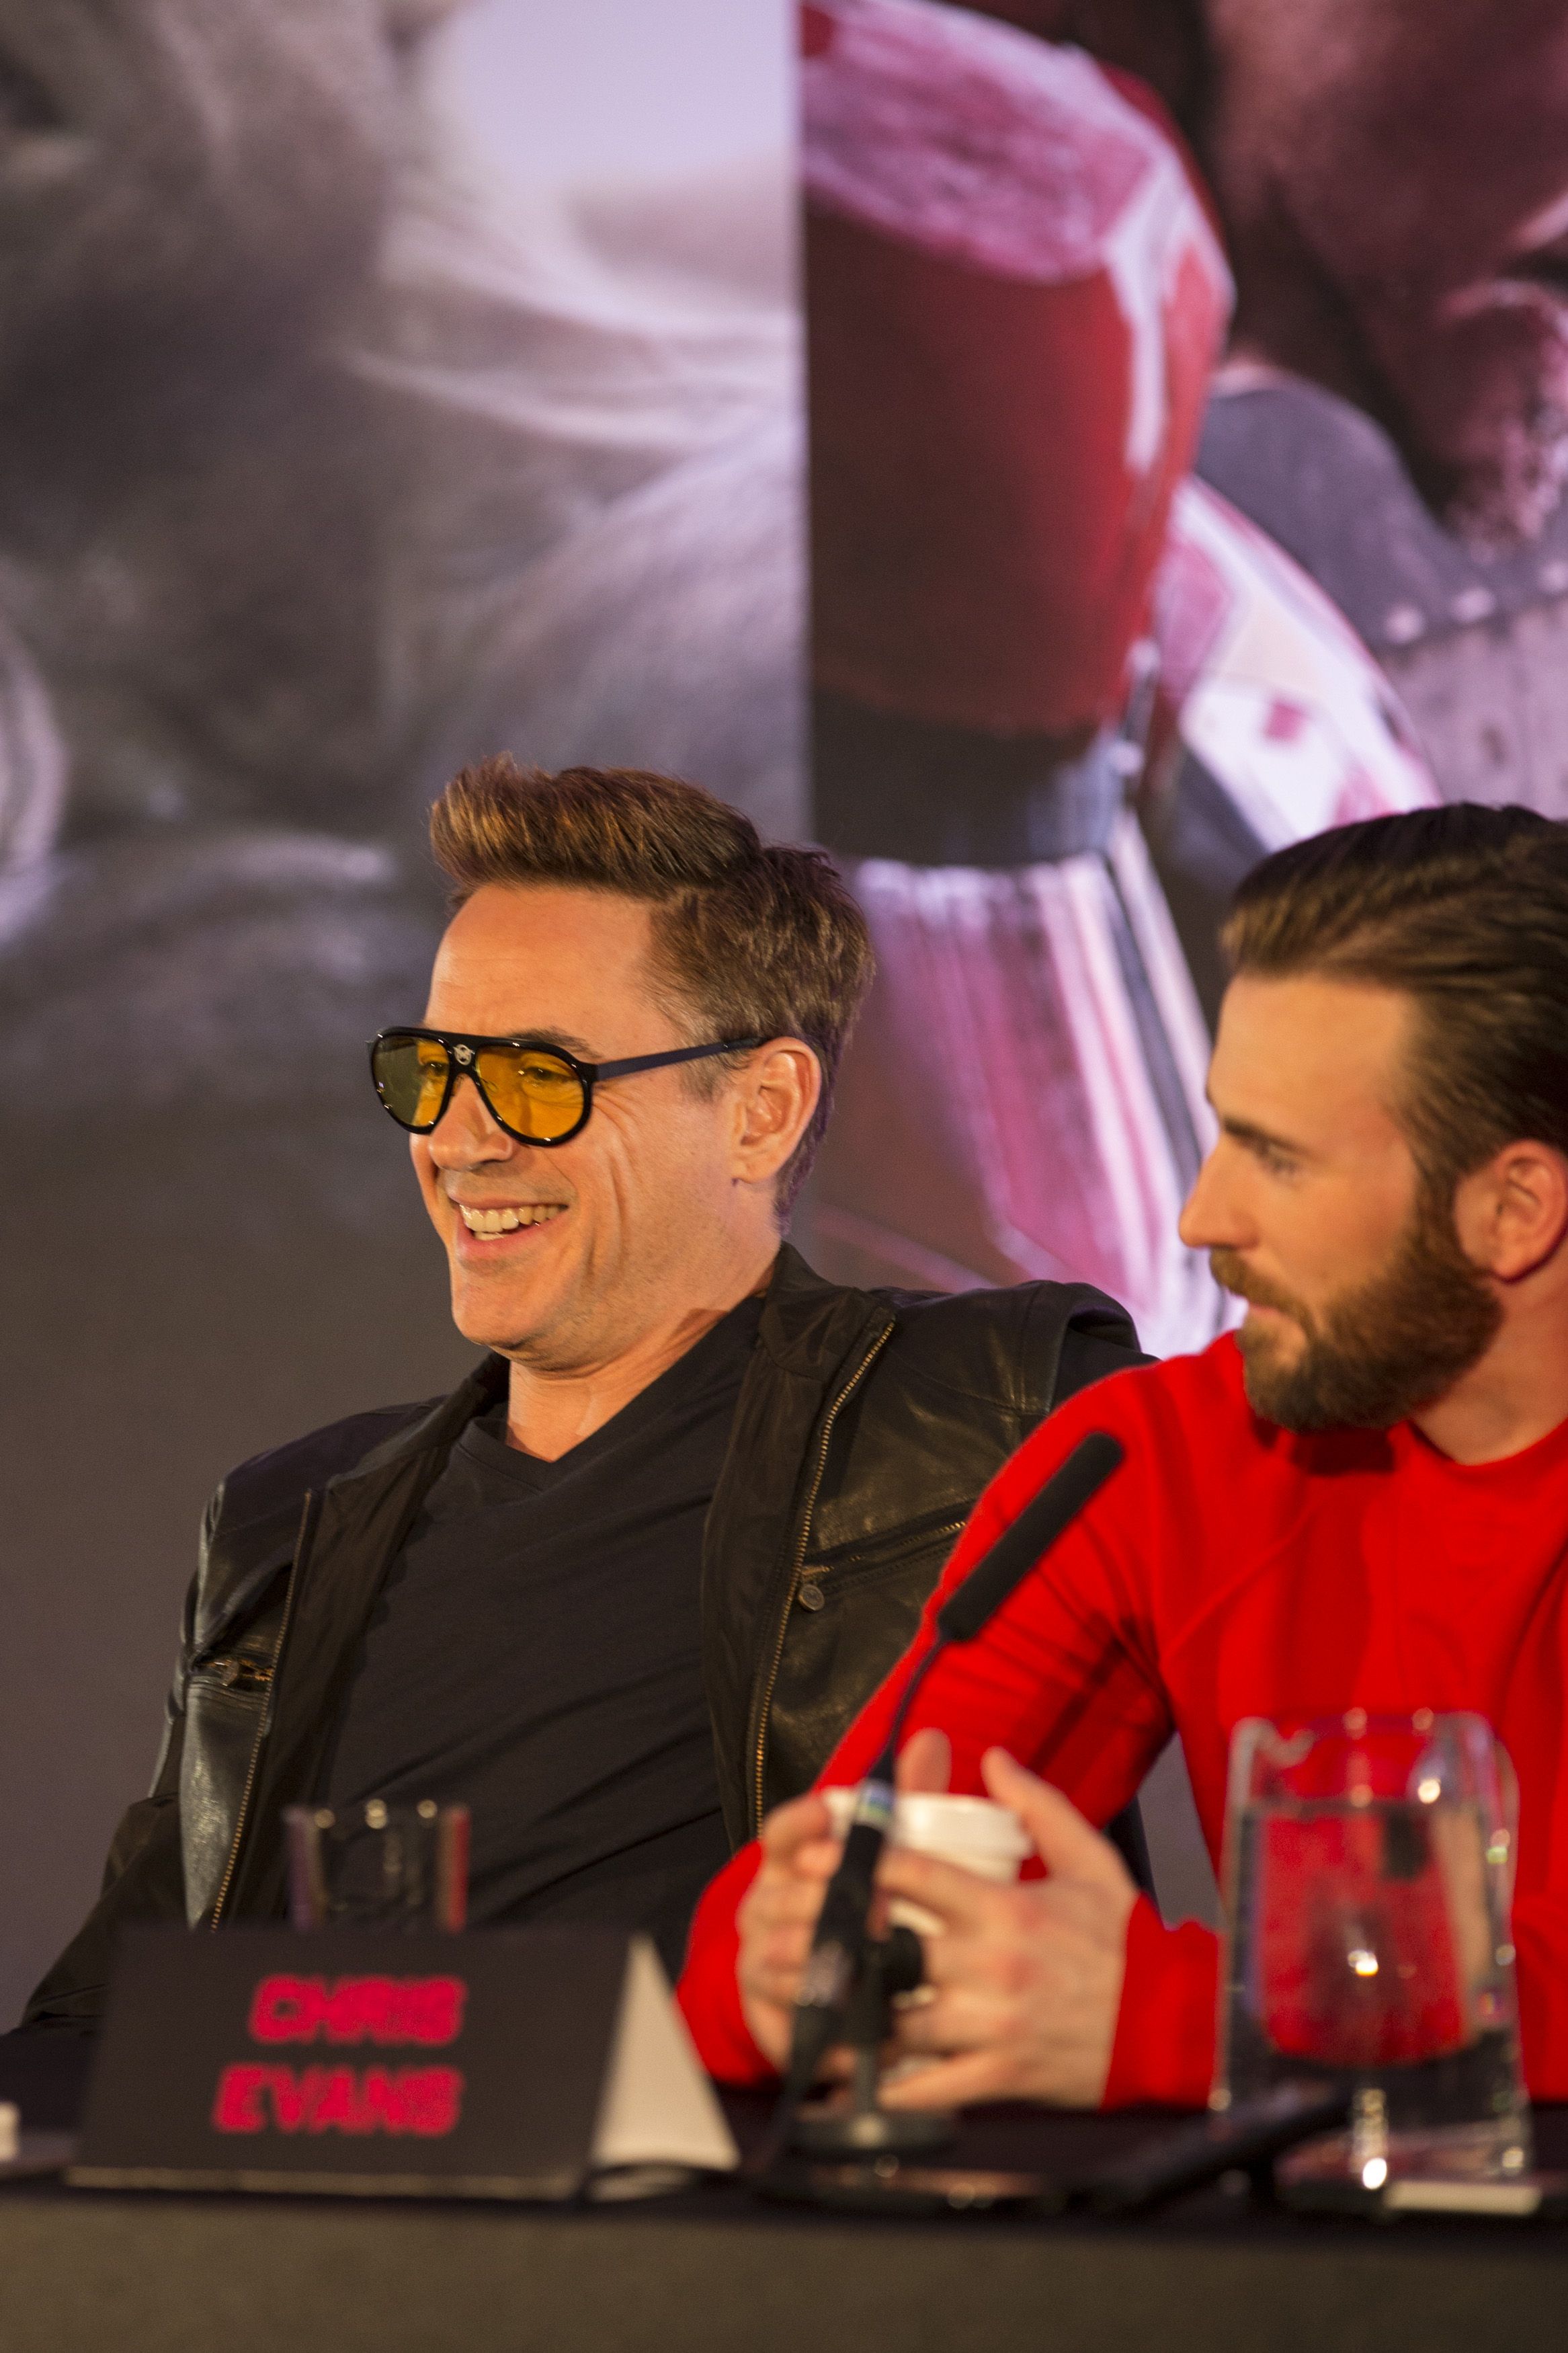 Robert Downey Jr and Chris Evans at the Avengers: Age of Ultron UK Press Conference Avengers: Age of Ultron Photo